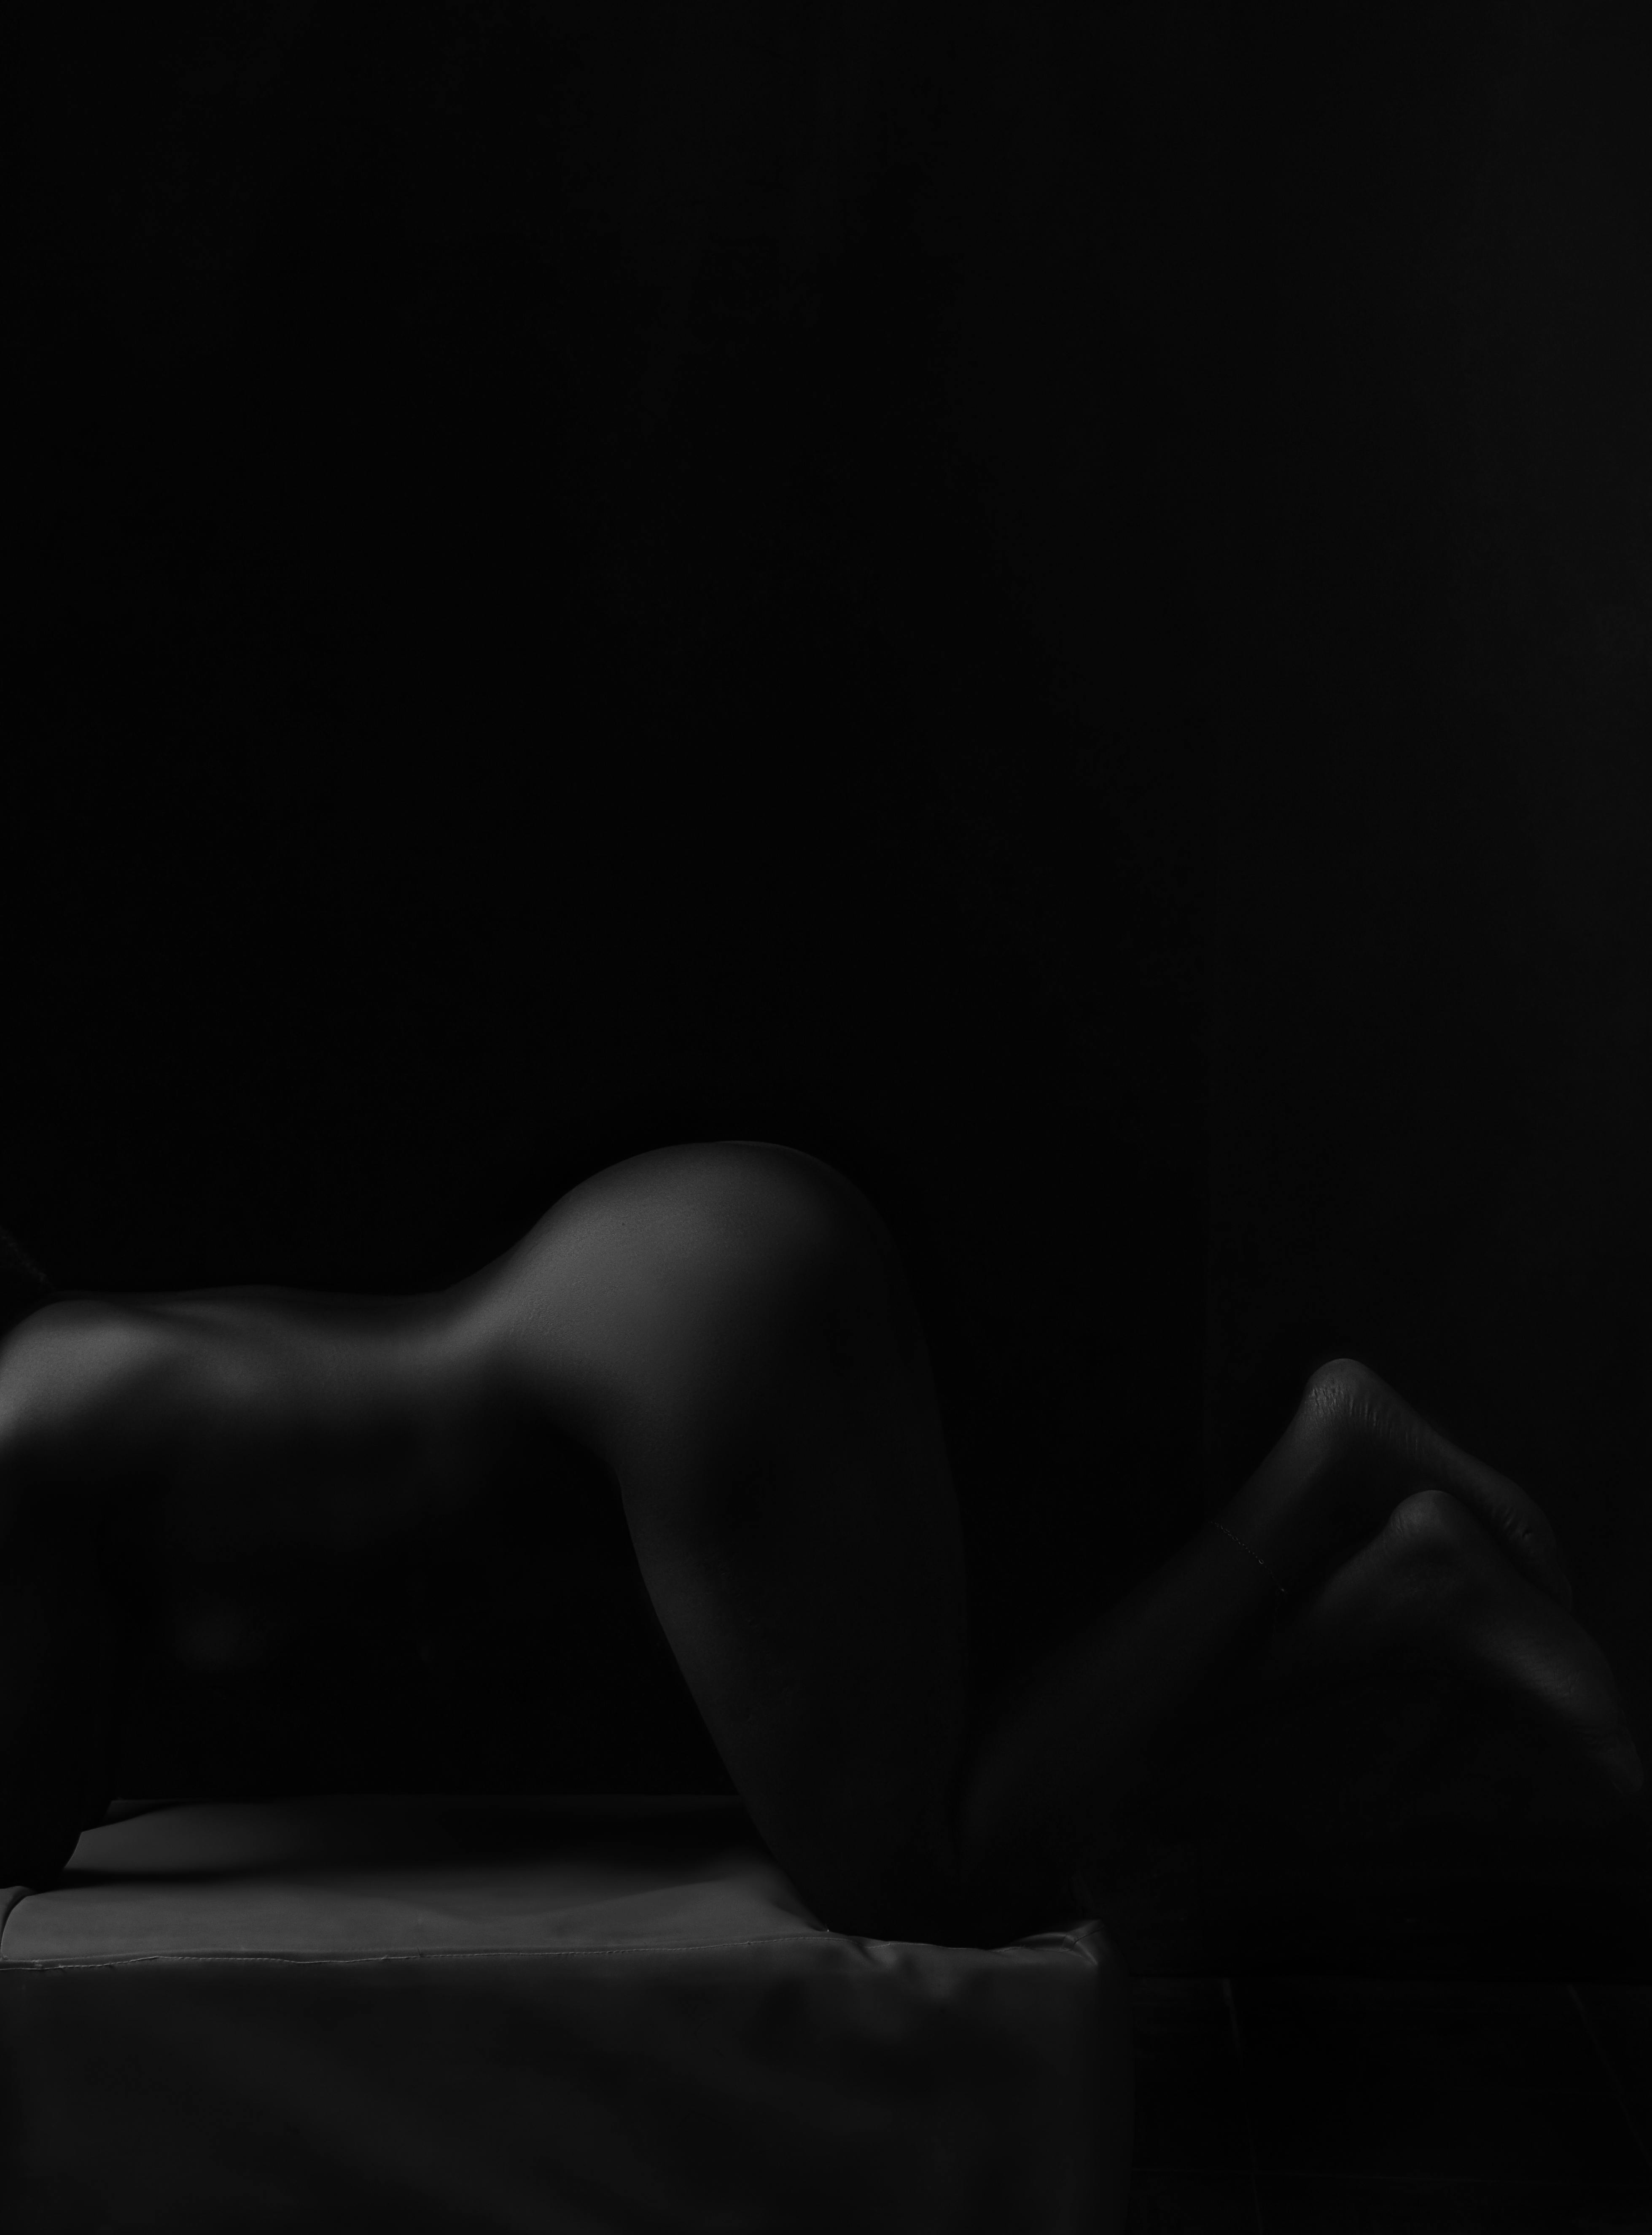 Naked woman in dark room · Free Stock Photo